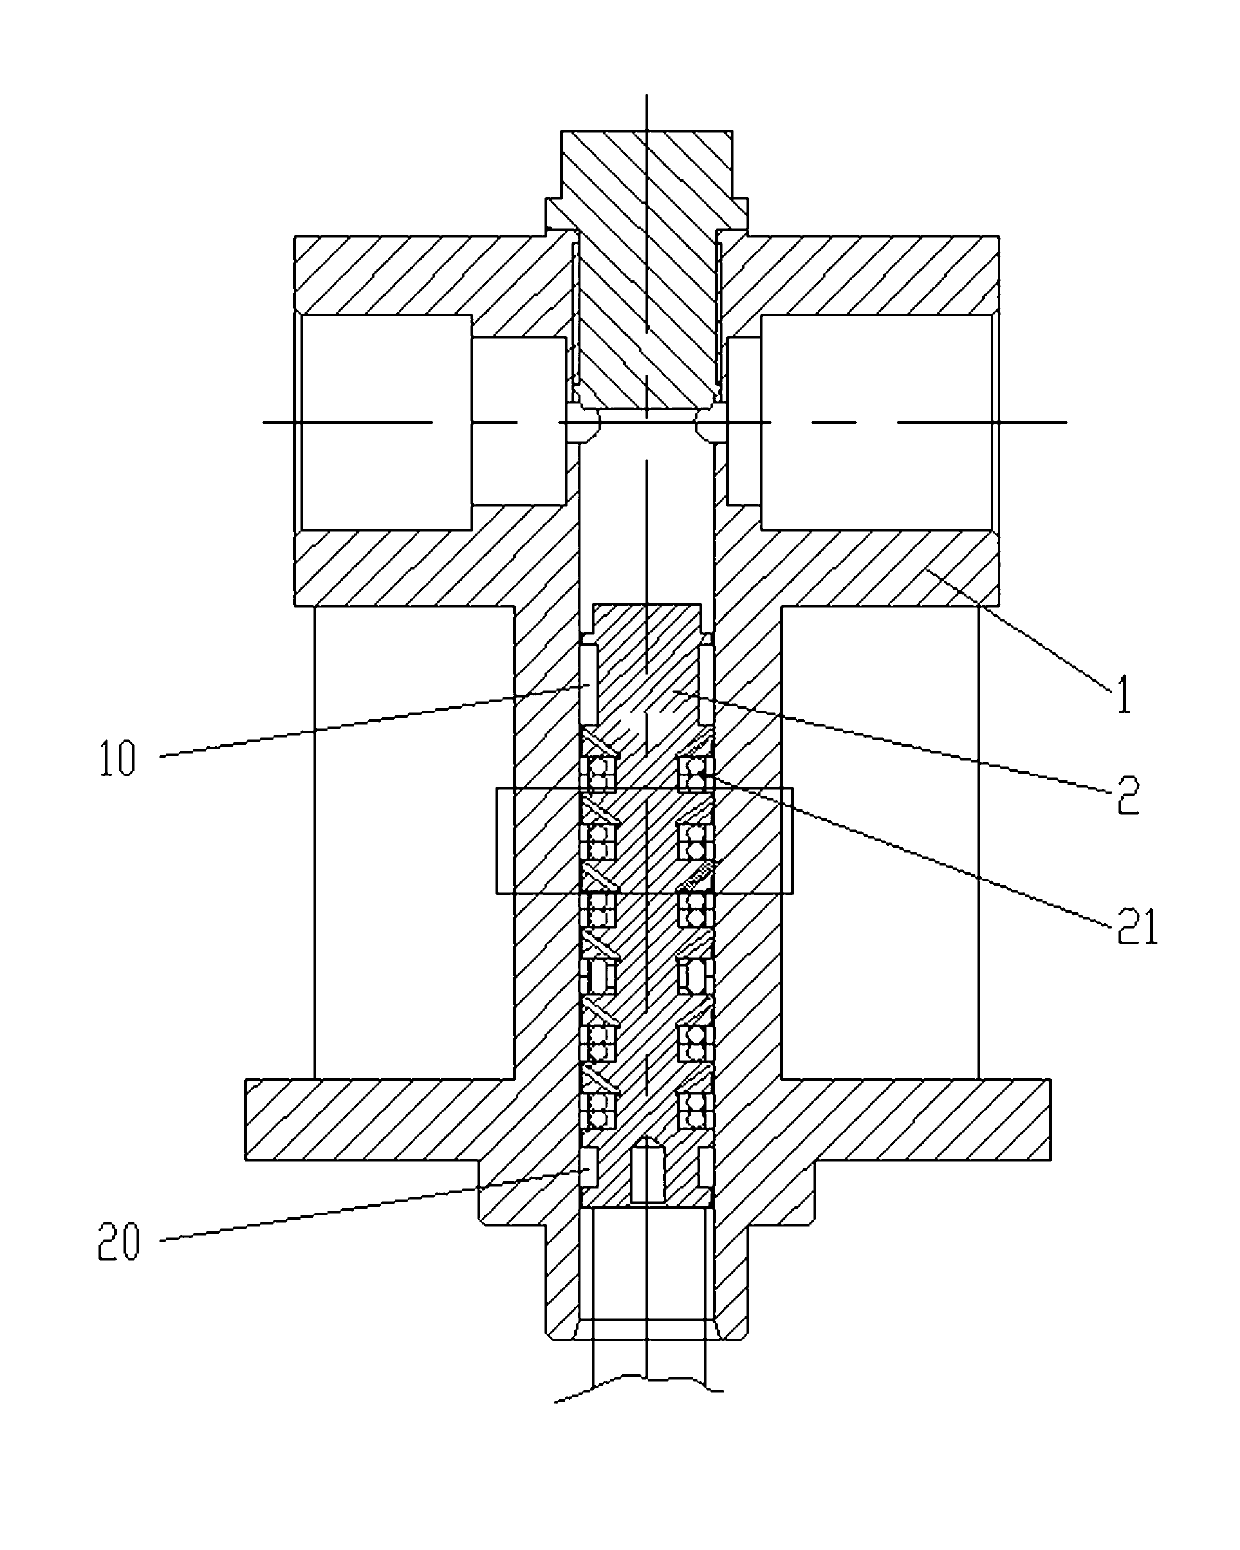 Dedicated piston assembly for reciprocating piston type gas compressor